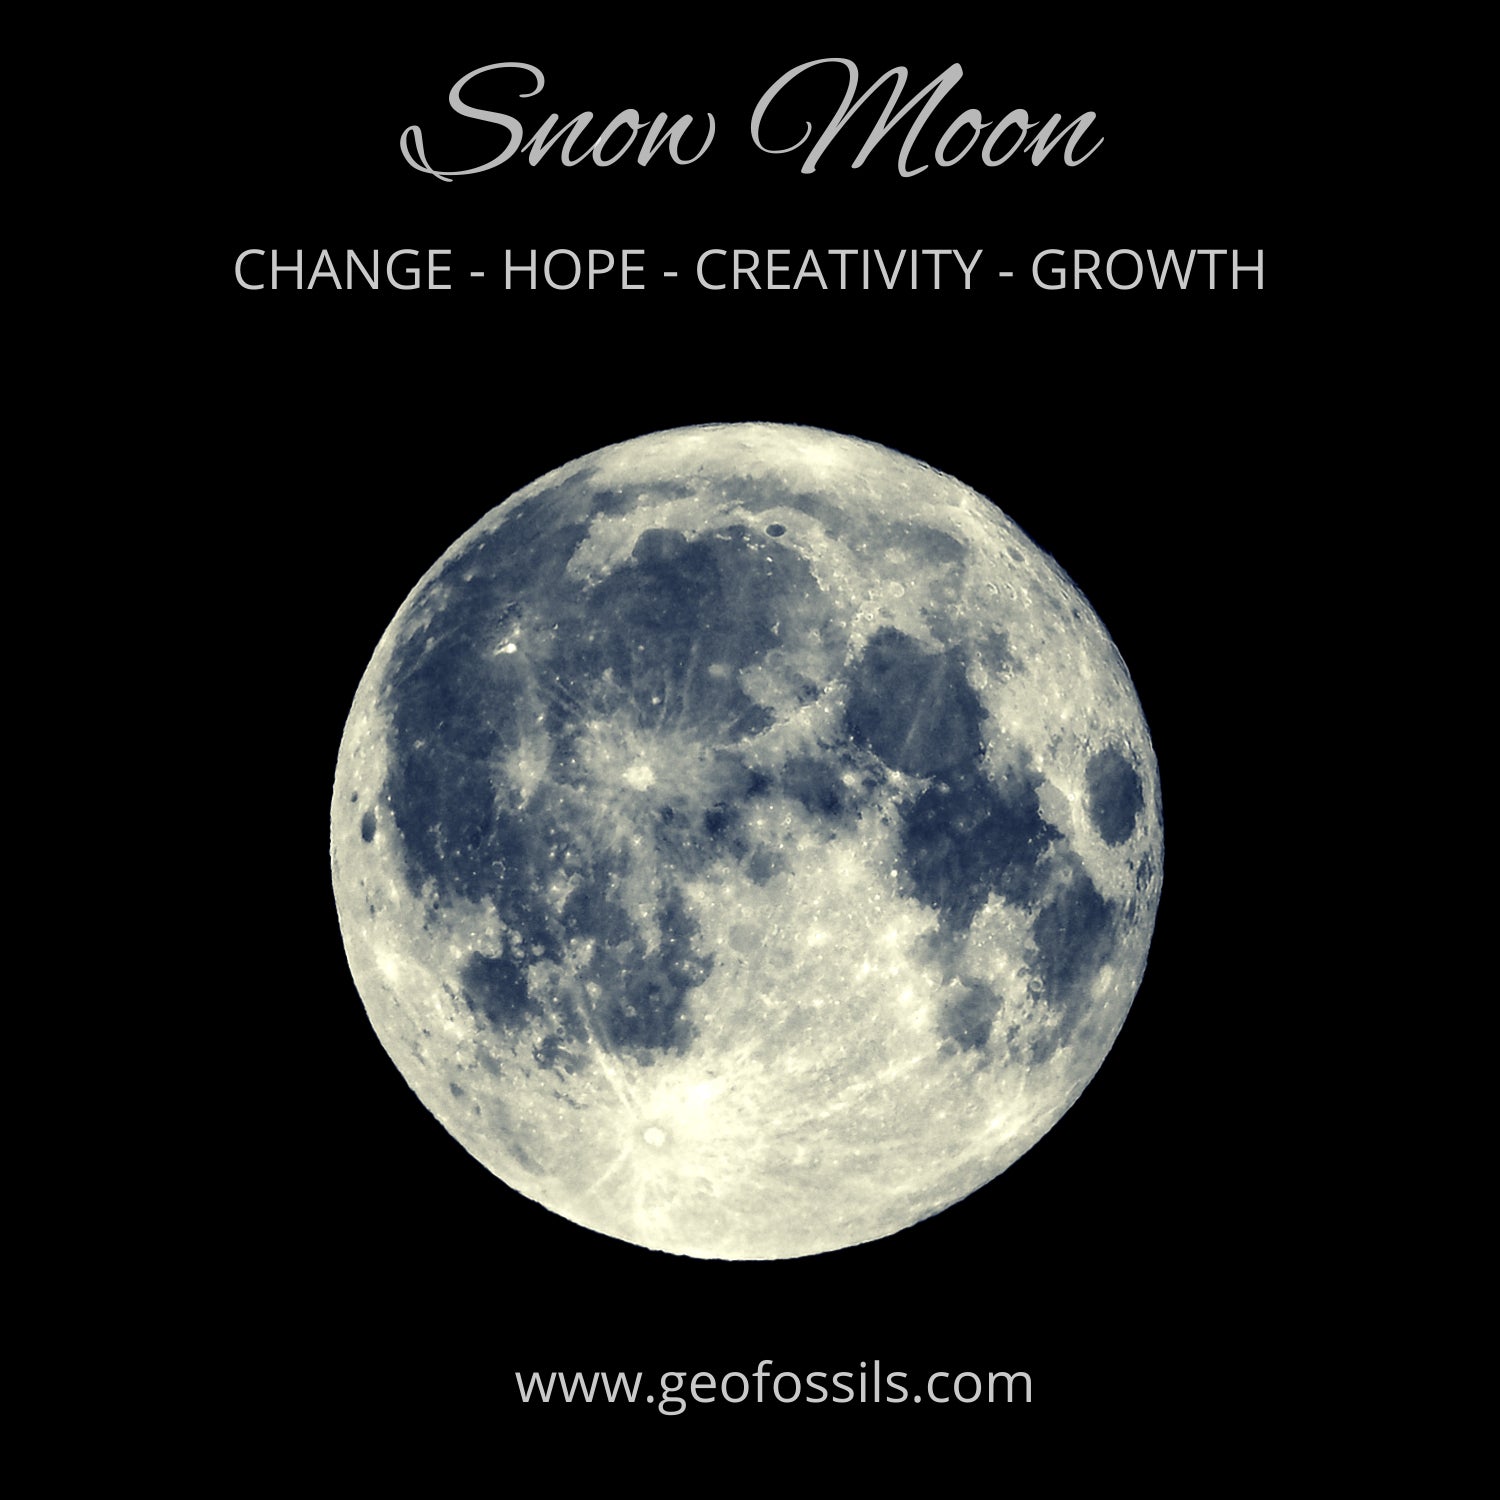 The Snow Moon of February